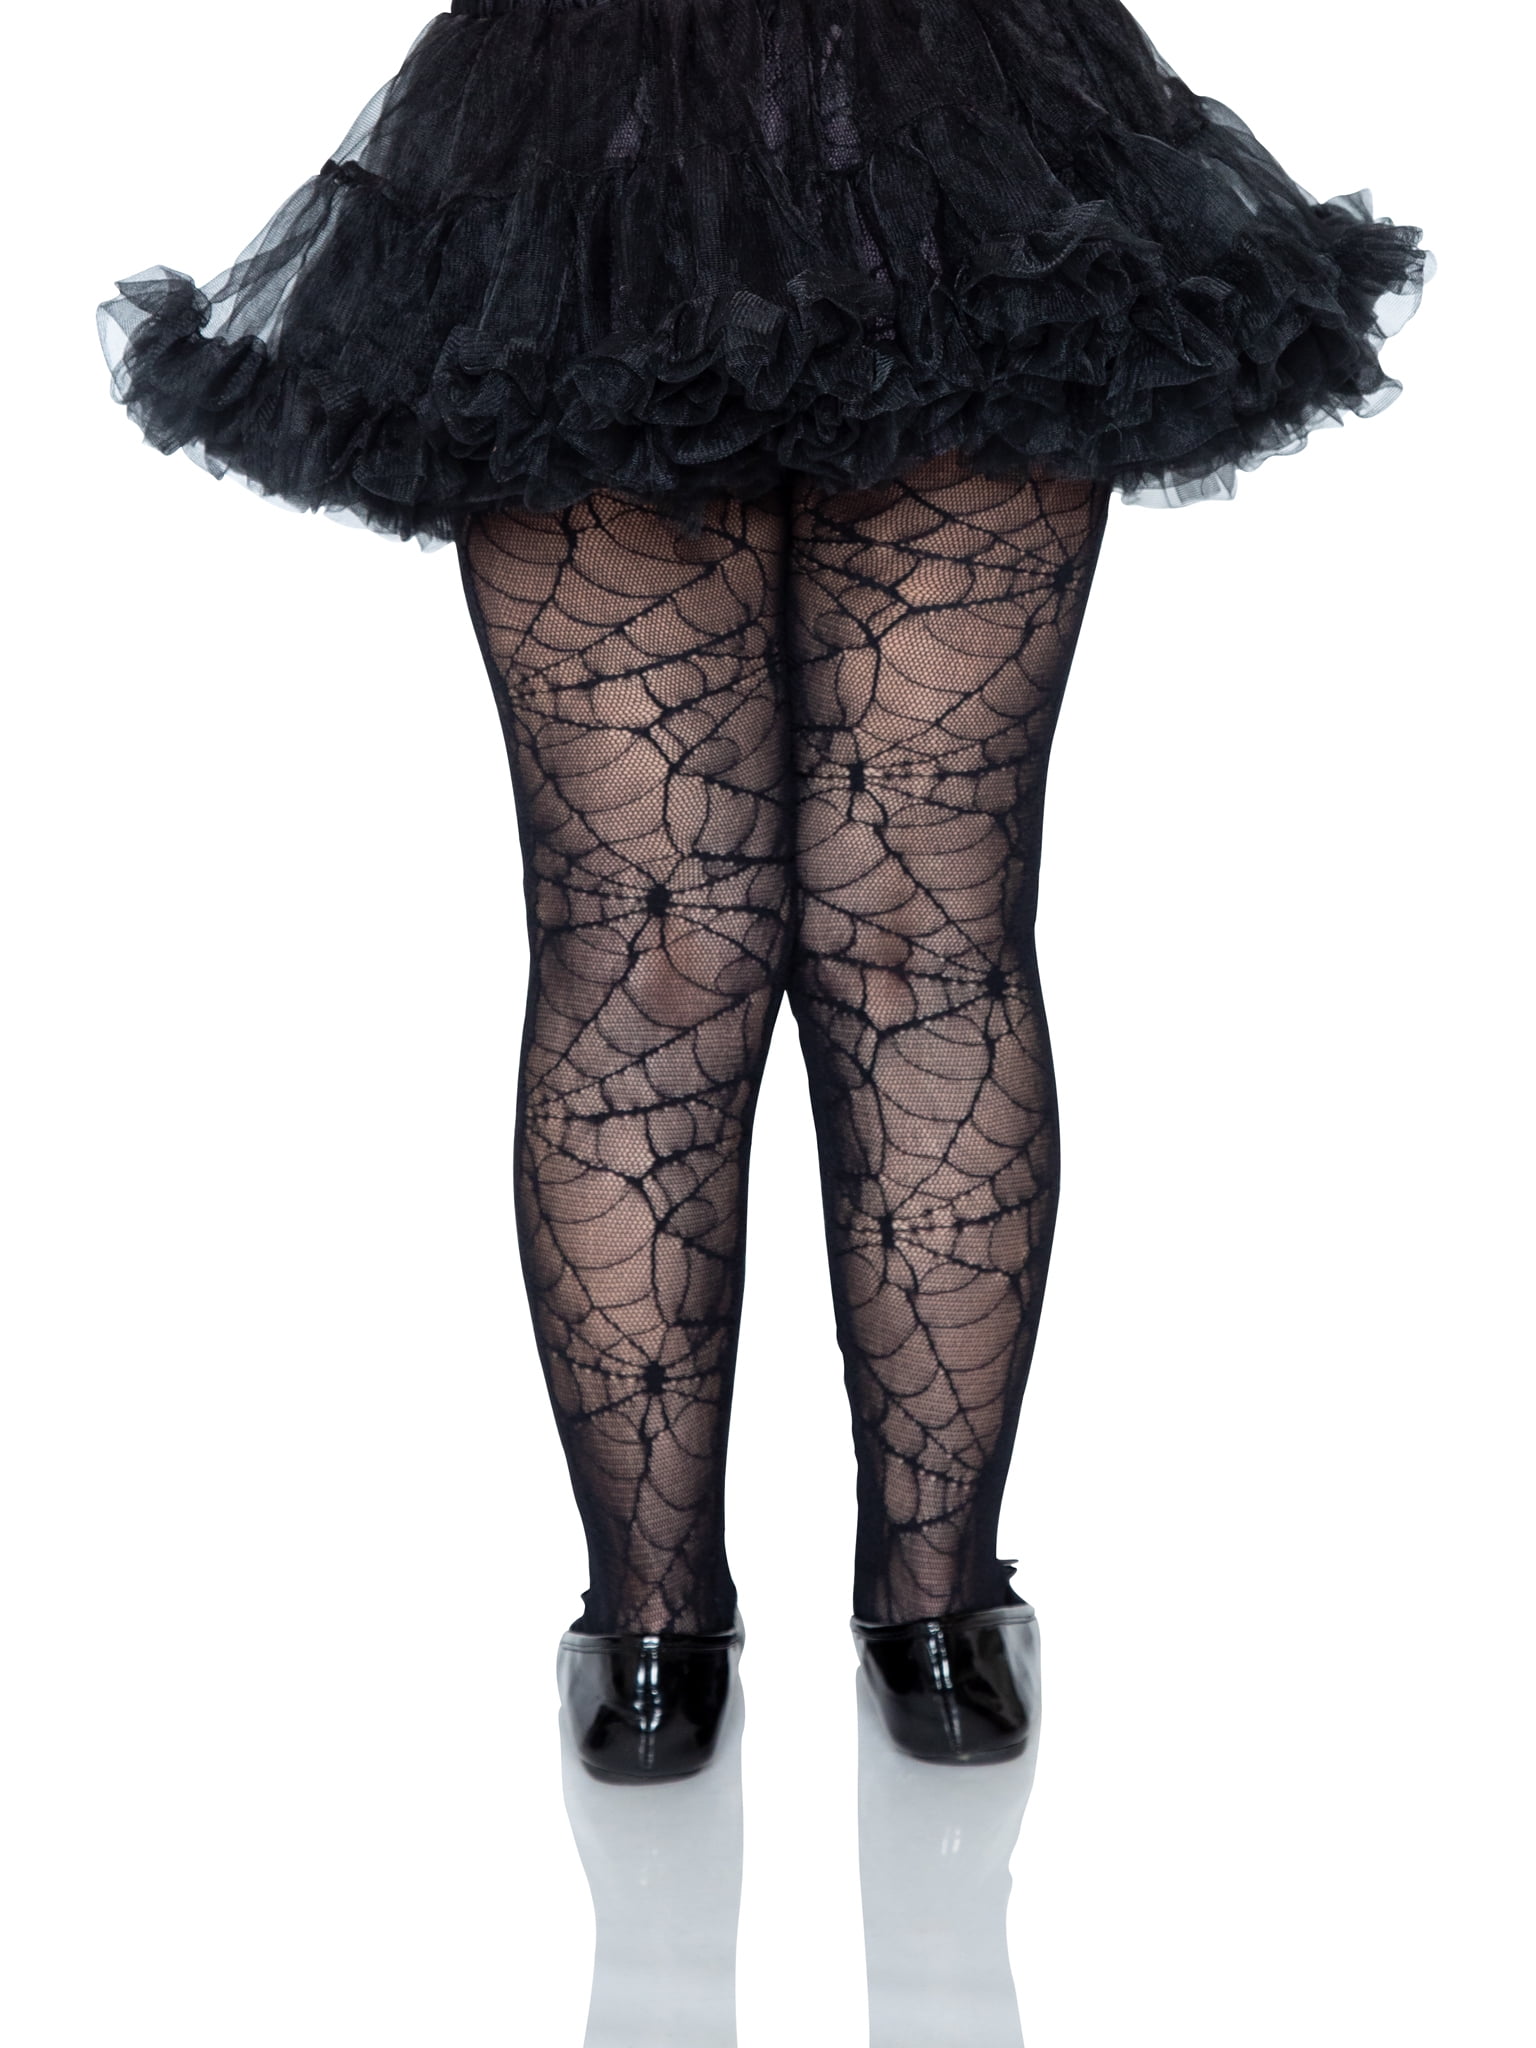 Halloween Girls Spider Web Lace Sheer Tights Costume Accessory